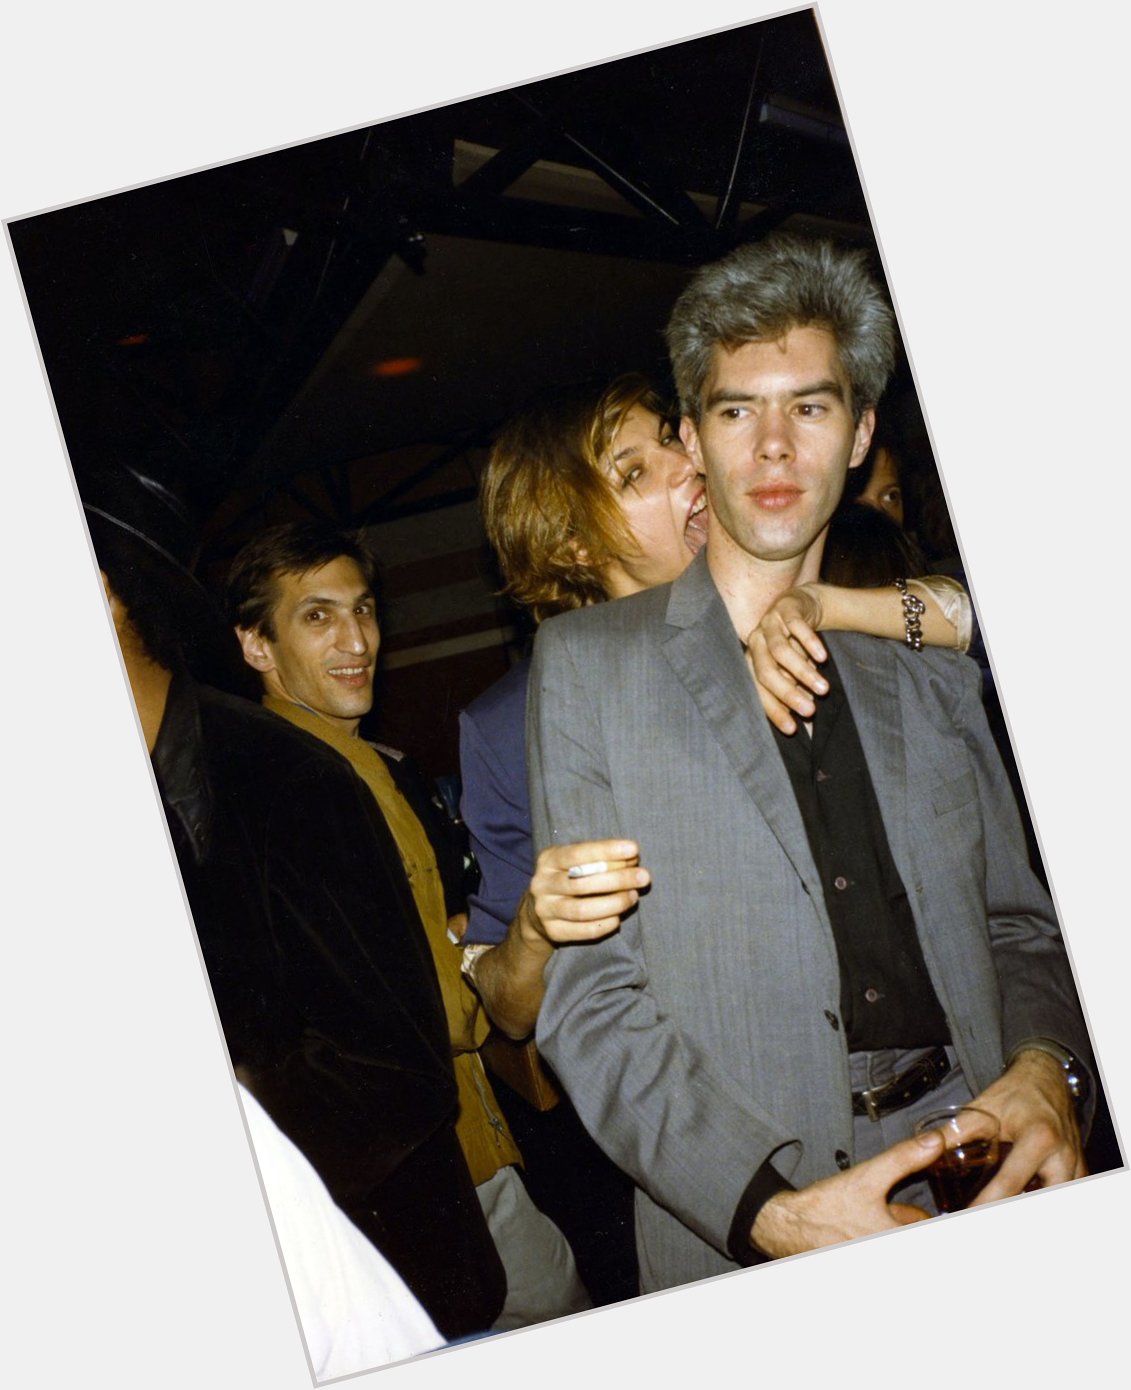 Happy Birthday, Jim Jarmusch! Here with Sara Driver and Richard Edson. Photo by Tom Farrell, 1984 